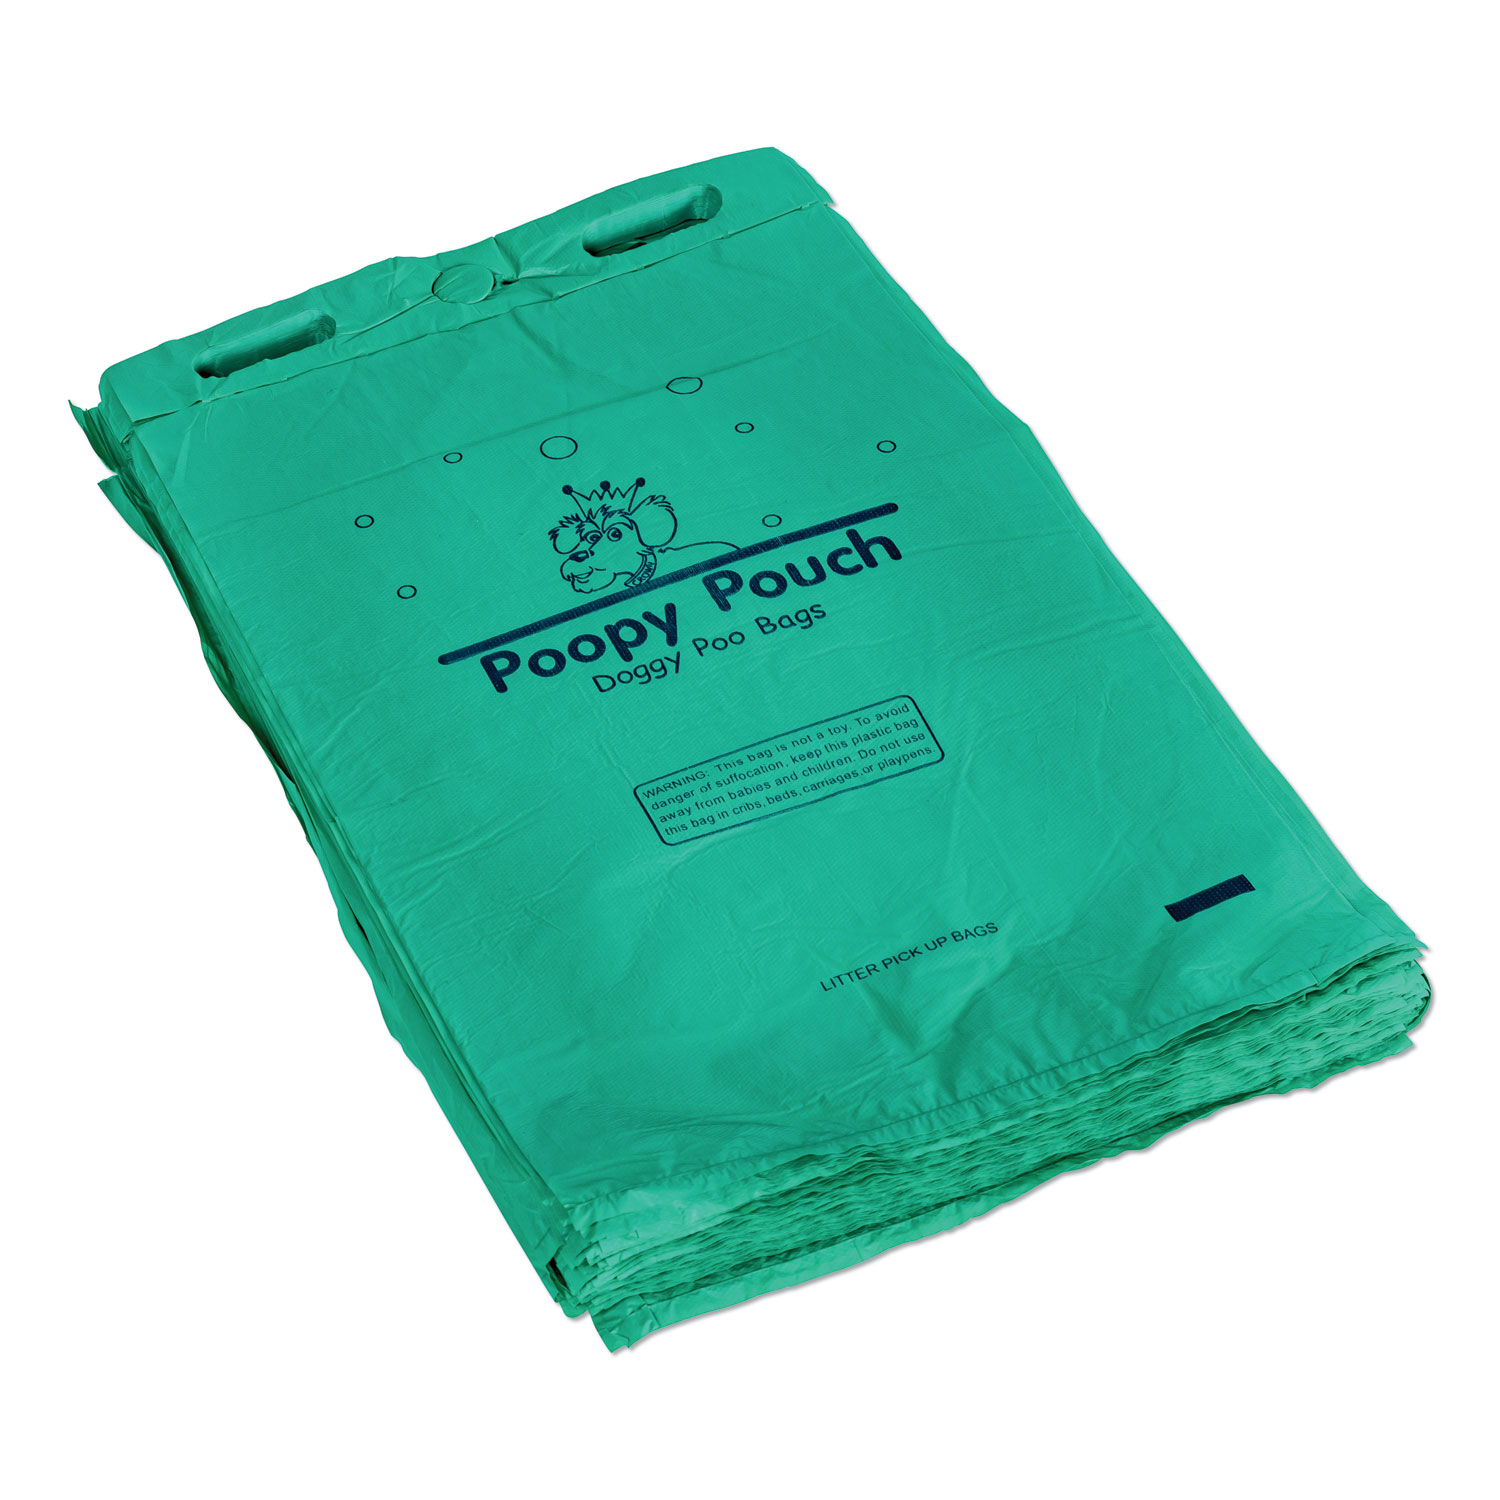  Poopy Pouch PP-H-200-20M Header Pet Waste Bags, 20 microns, 8 x 13, Green, 2,400/Carton (CWDPPH20020M) 